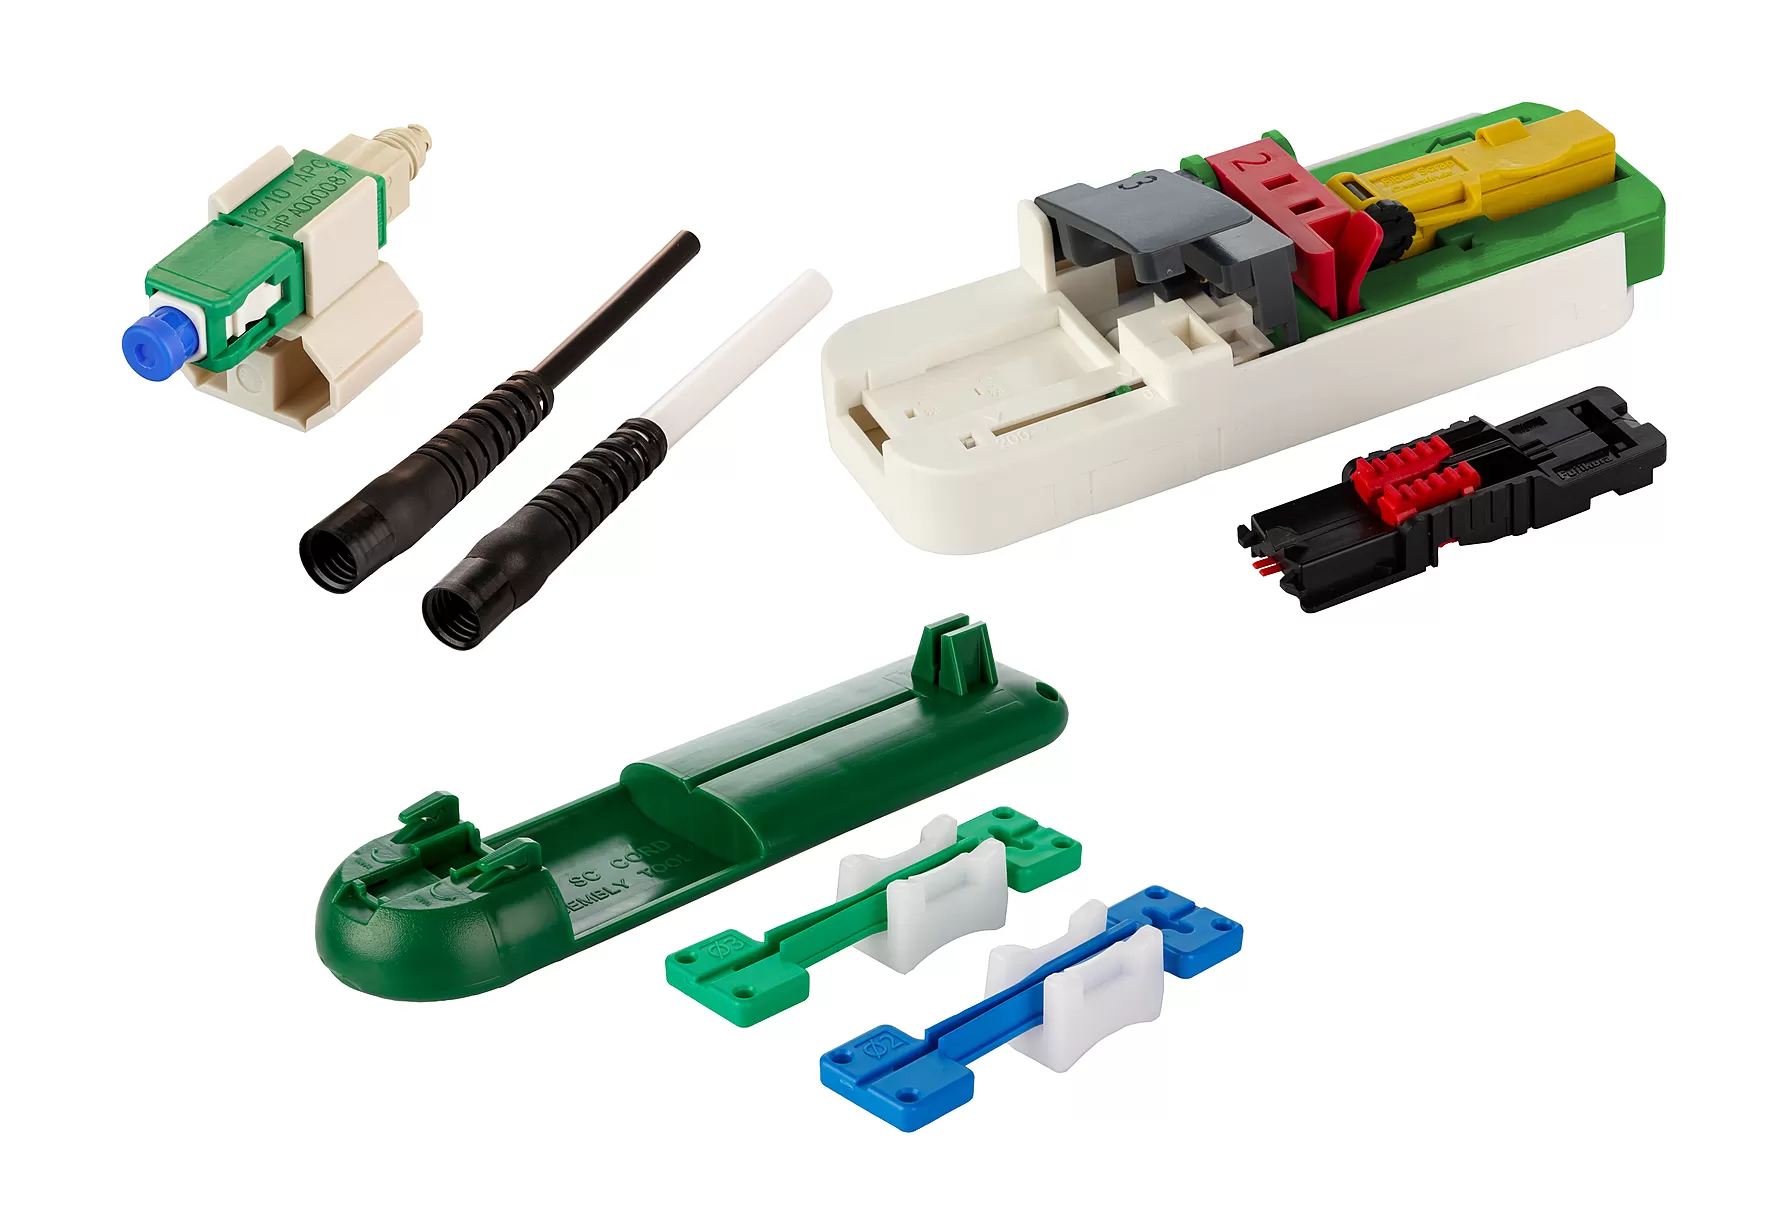 Metz Connect OpDAT FAST Hybrid Steckerbausatz SC APC OS2 100 Stück für Kabel Ø 2,0 + 3,0 mm inkl. Cleaver-Set, Faser-Guide und Kabelassemblierungsset 1509QKEA010C-E